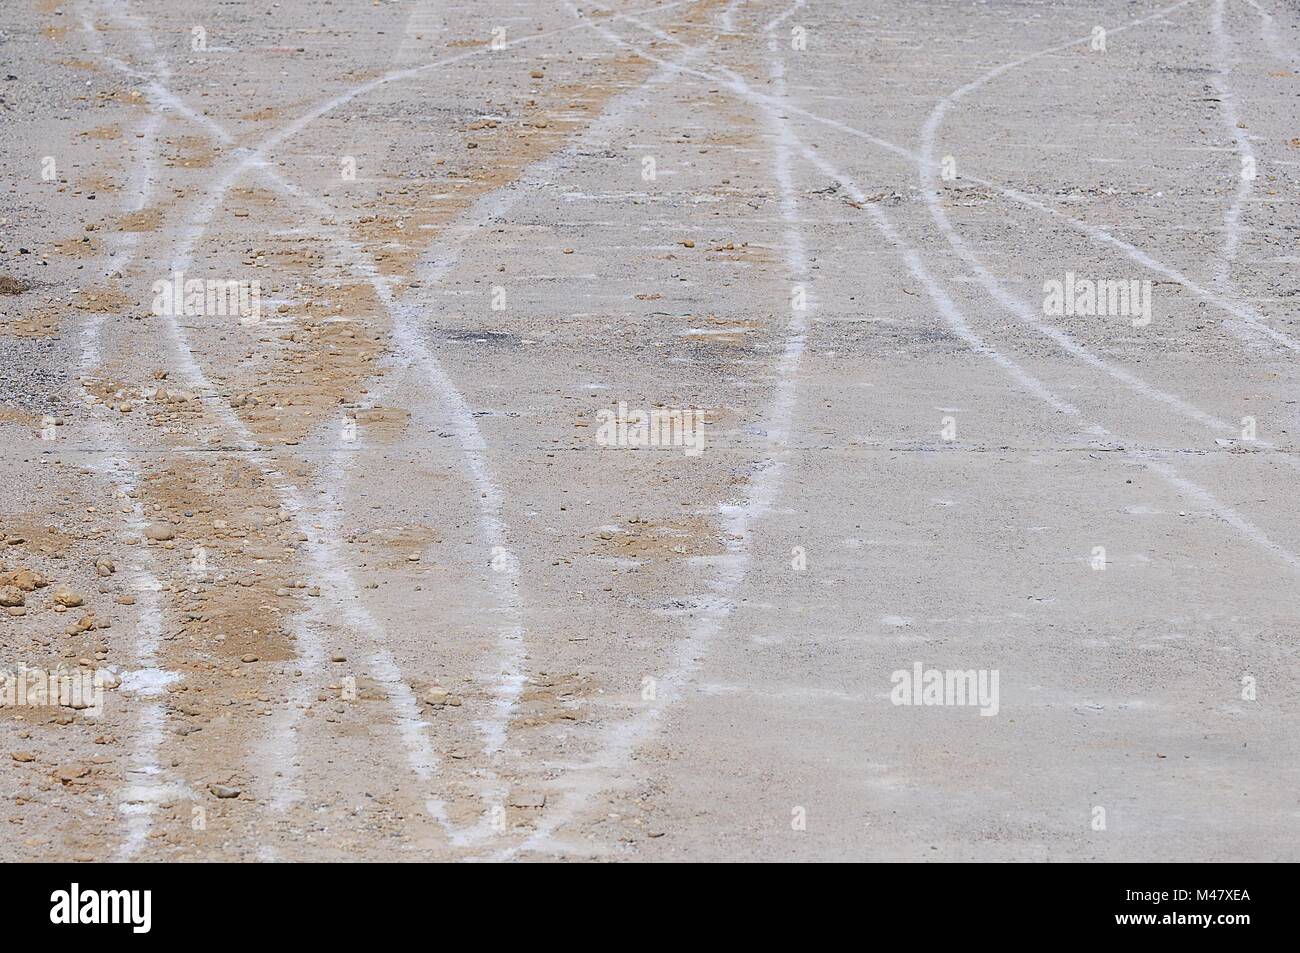 Concrete pavement with traces of the construction site Stock Photo